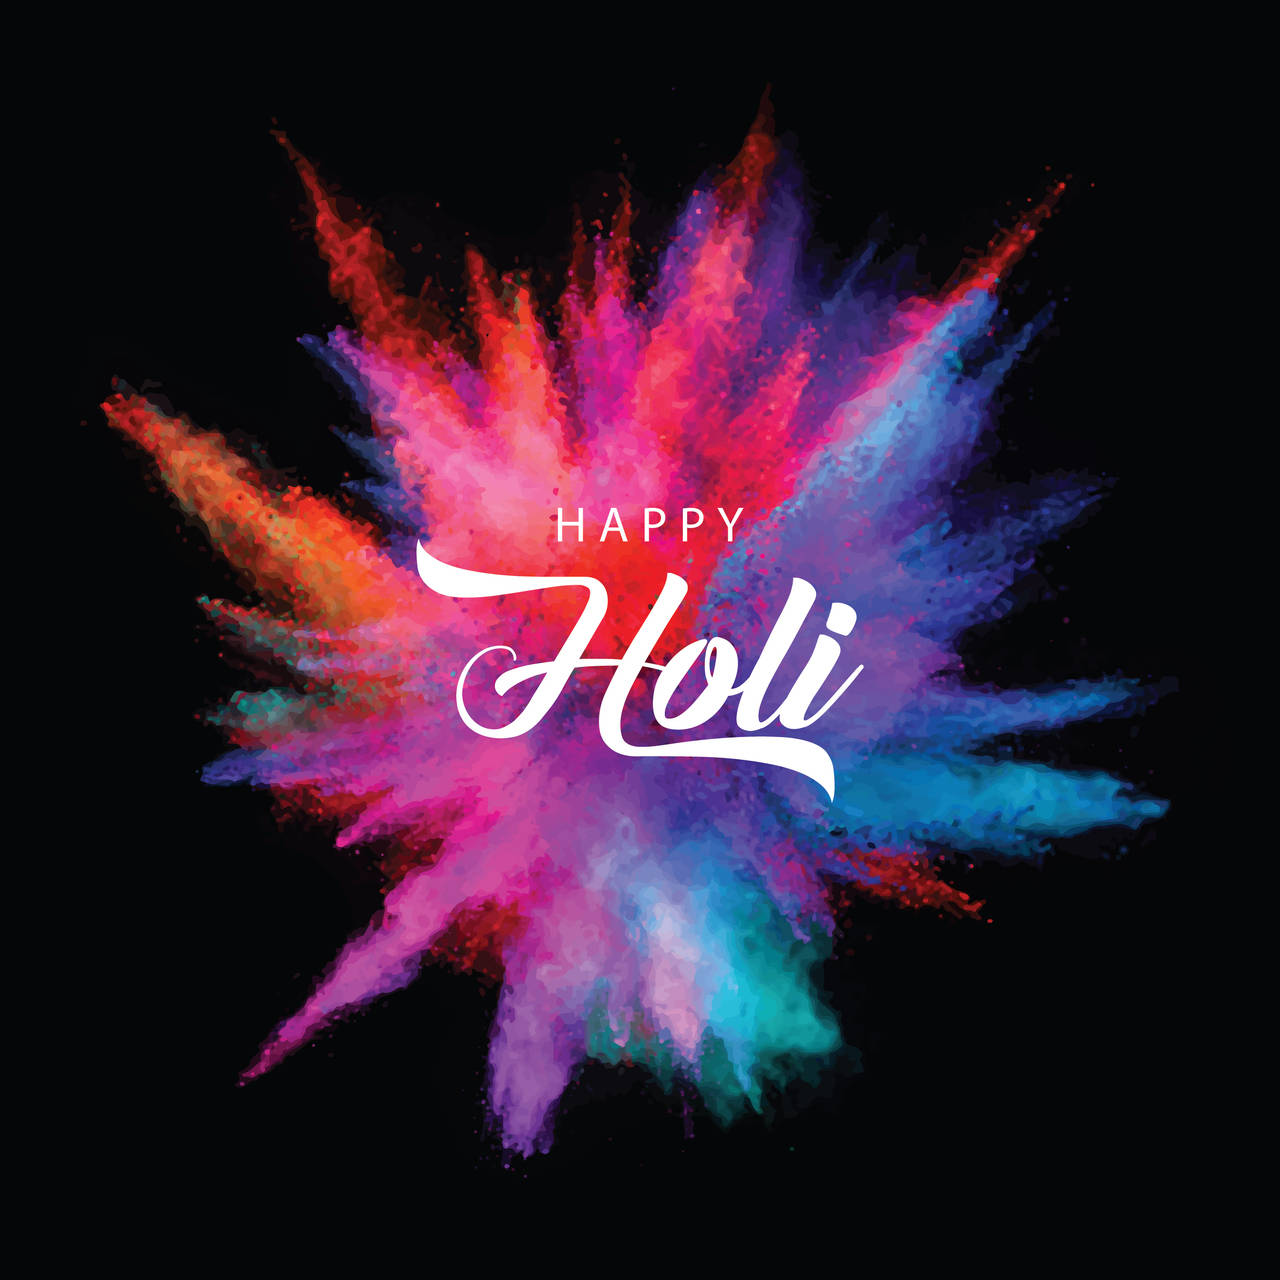 Happy Holi 2020 Memes, Funny Images, Jokes, Wishes, Messages, Pictures,  Status & Cards: Funny memes and pictures to share with your family and  friends | - Times of India